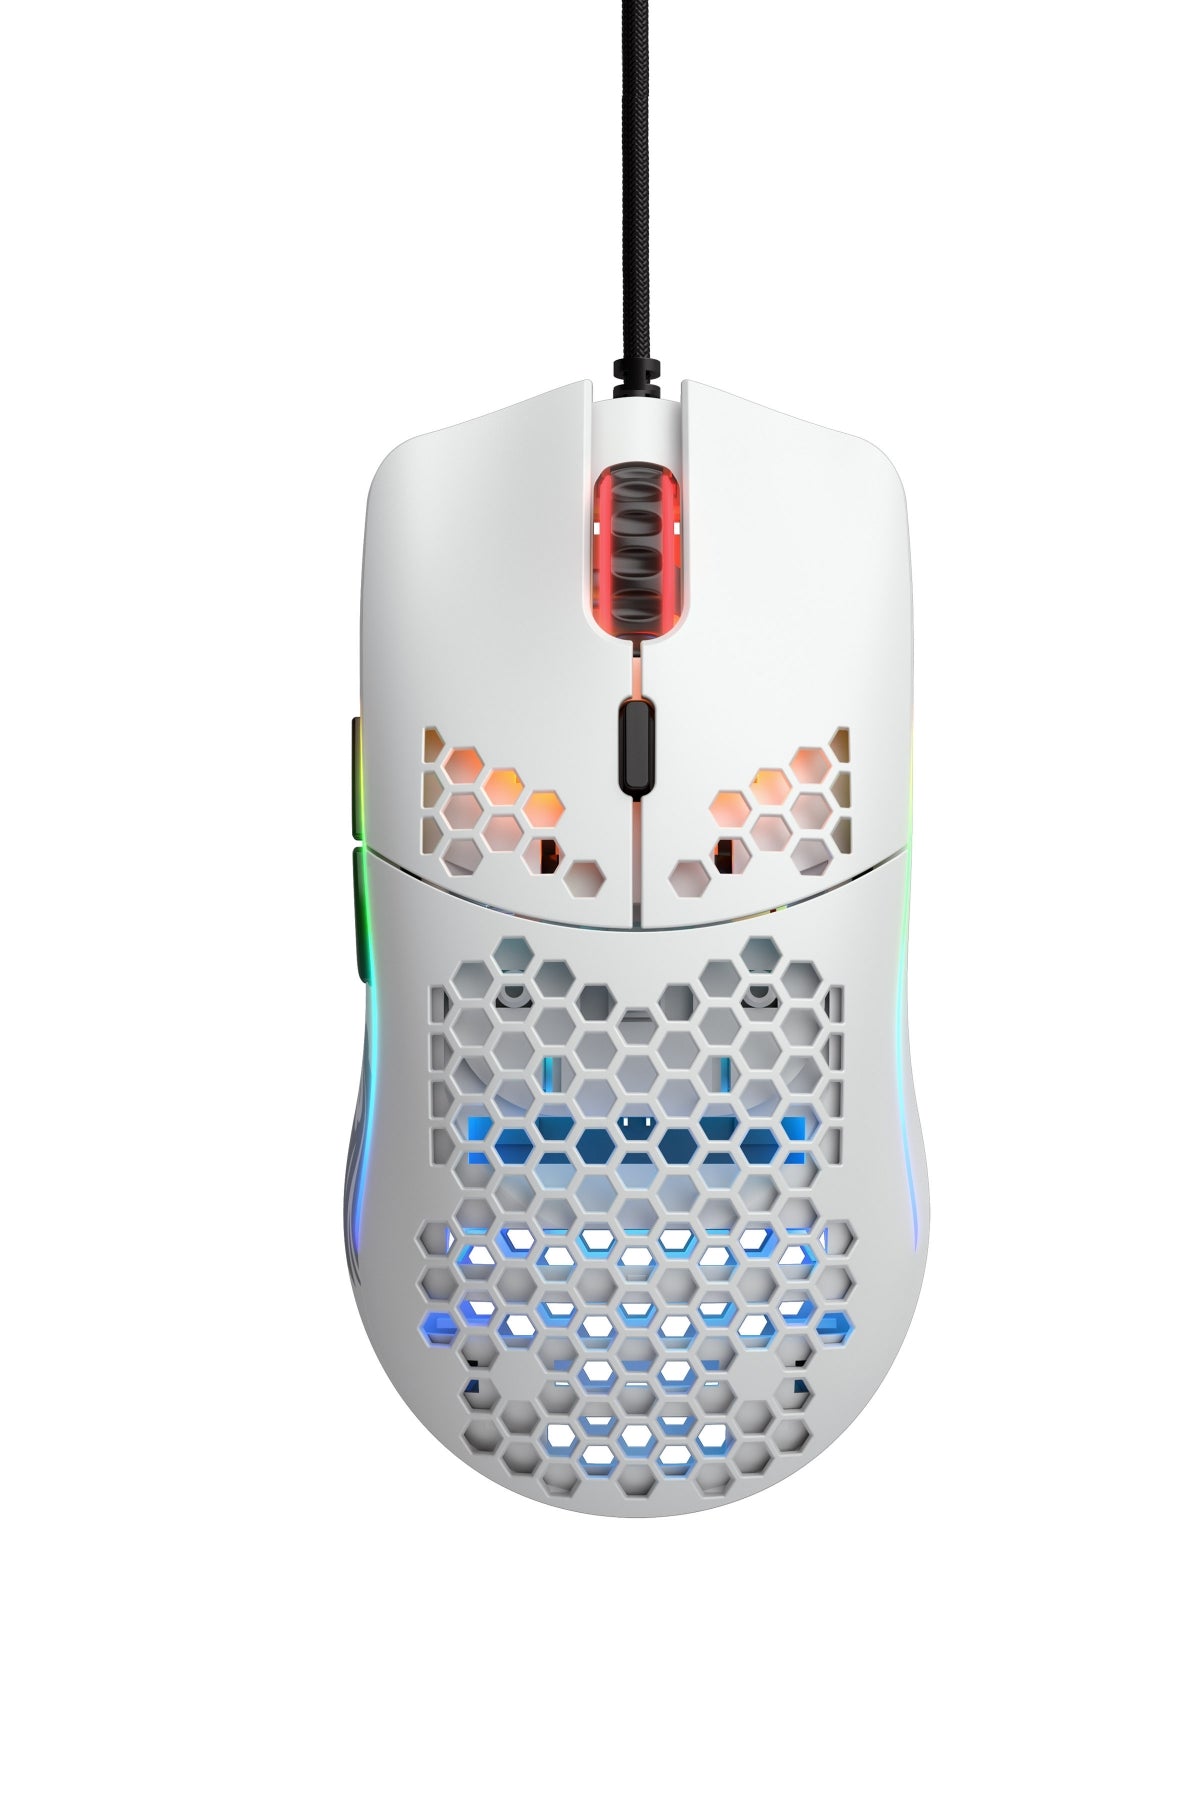 Glorious Model O Matte White Gaming Mouse